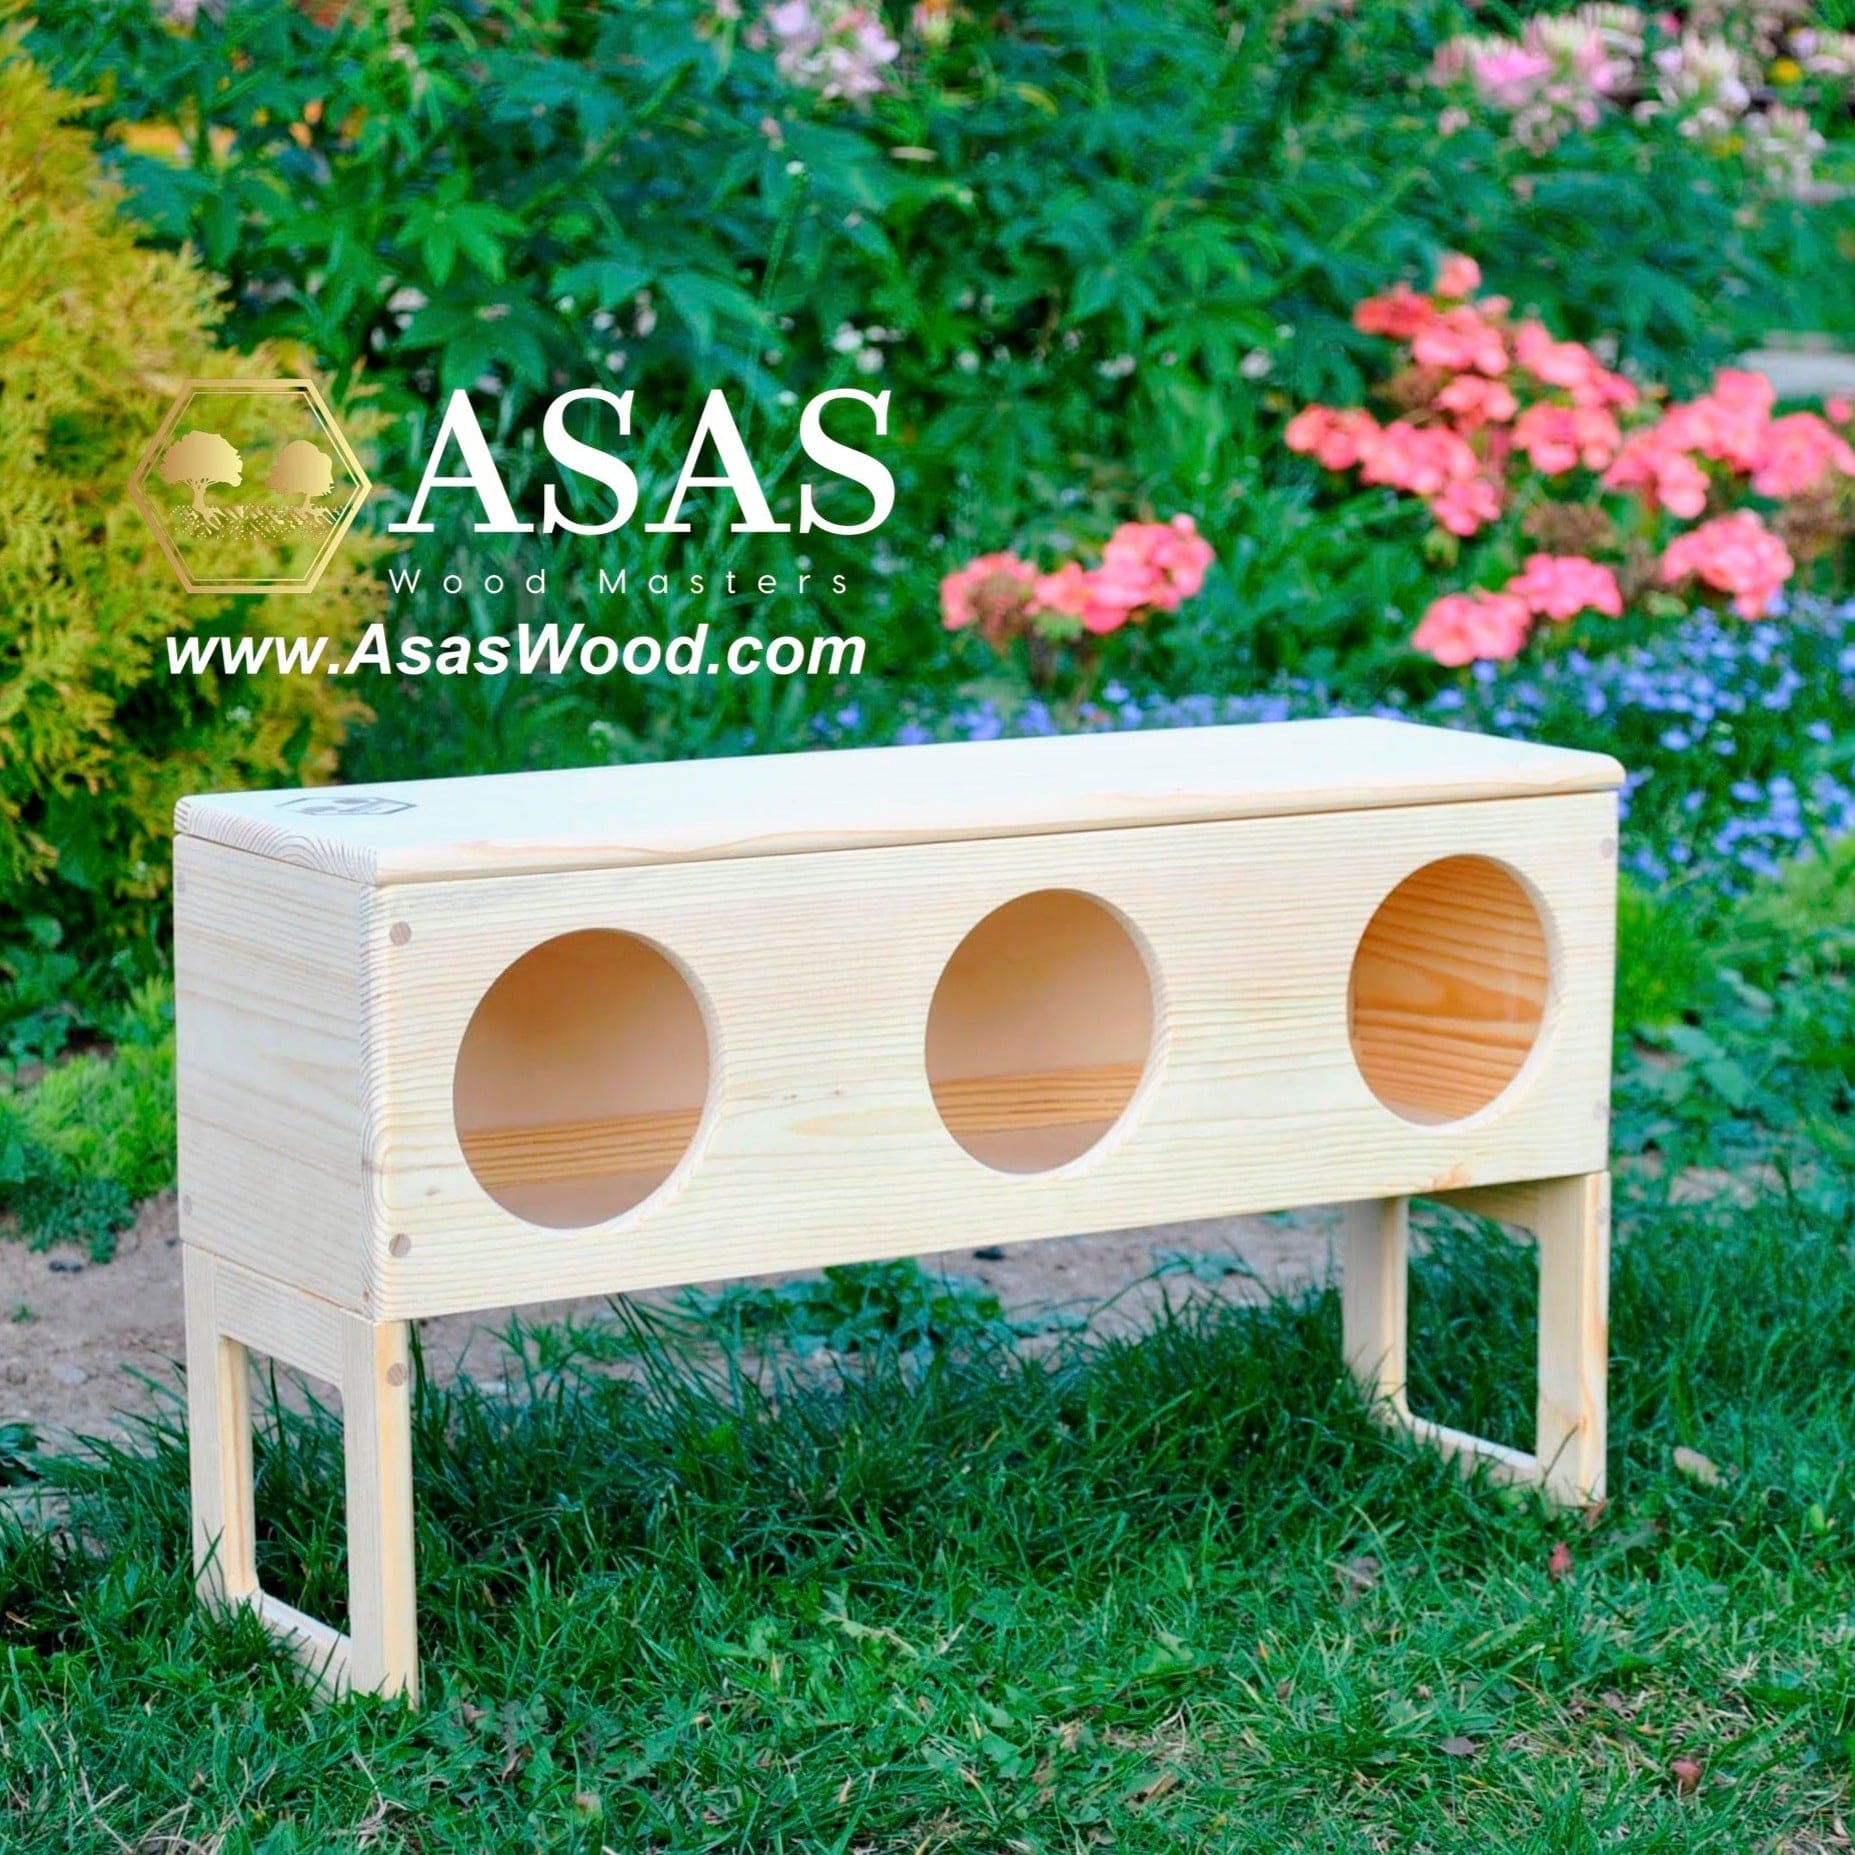 rabbit hay feeder over litter box, made by asaswood